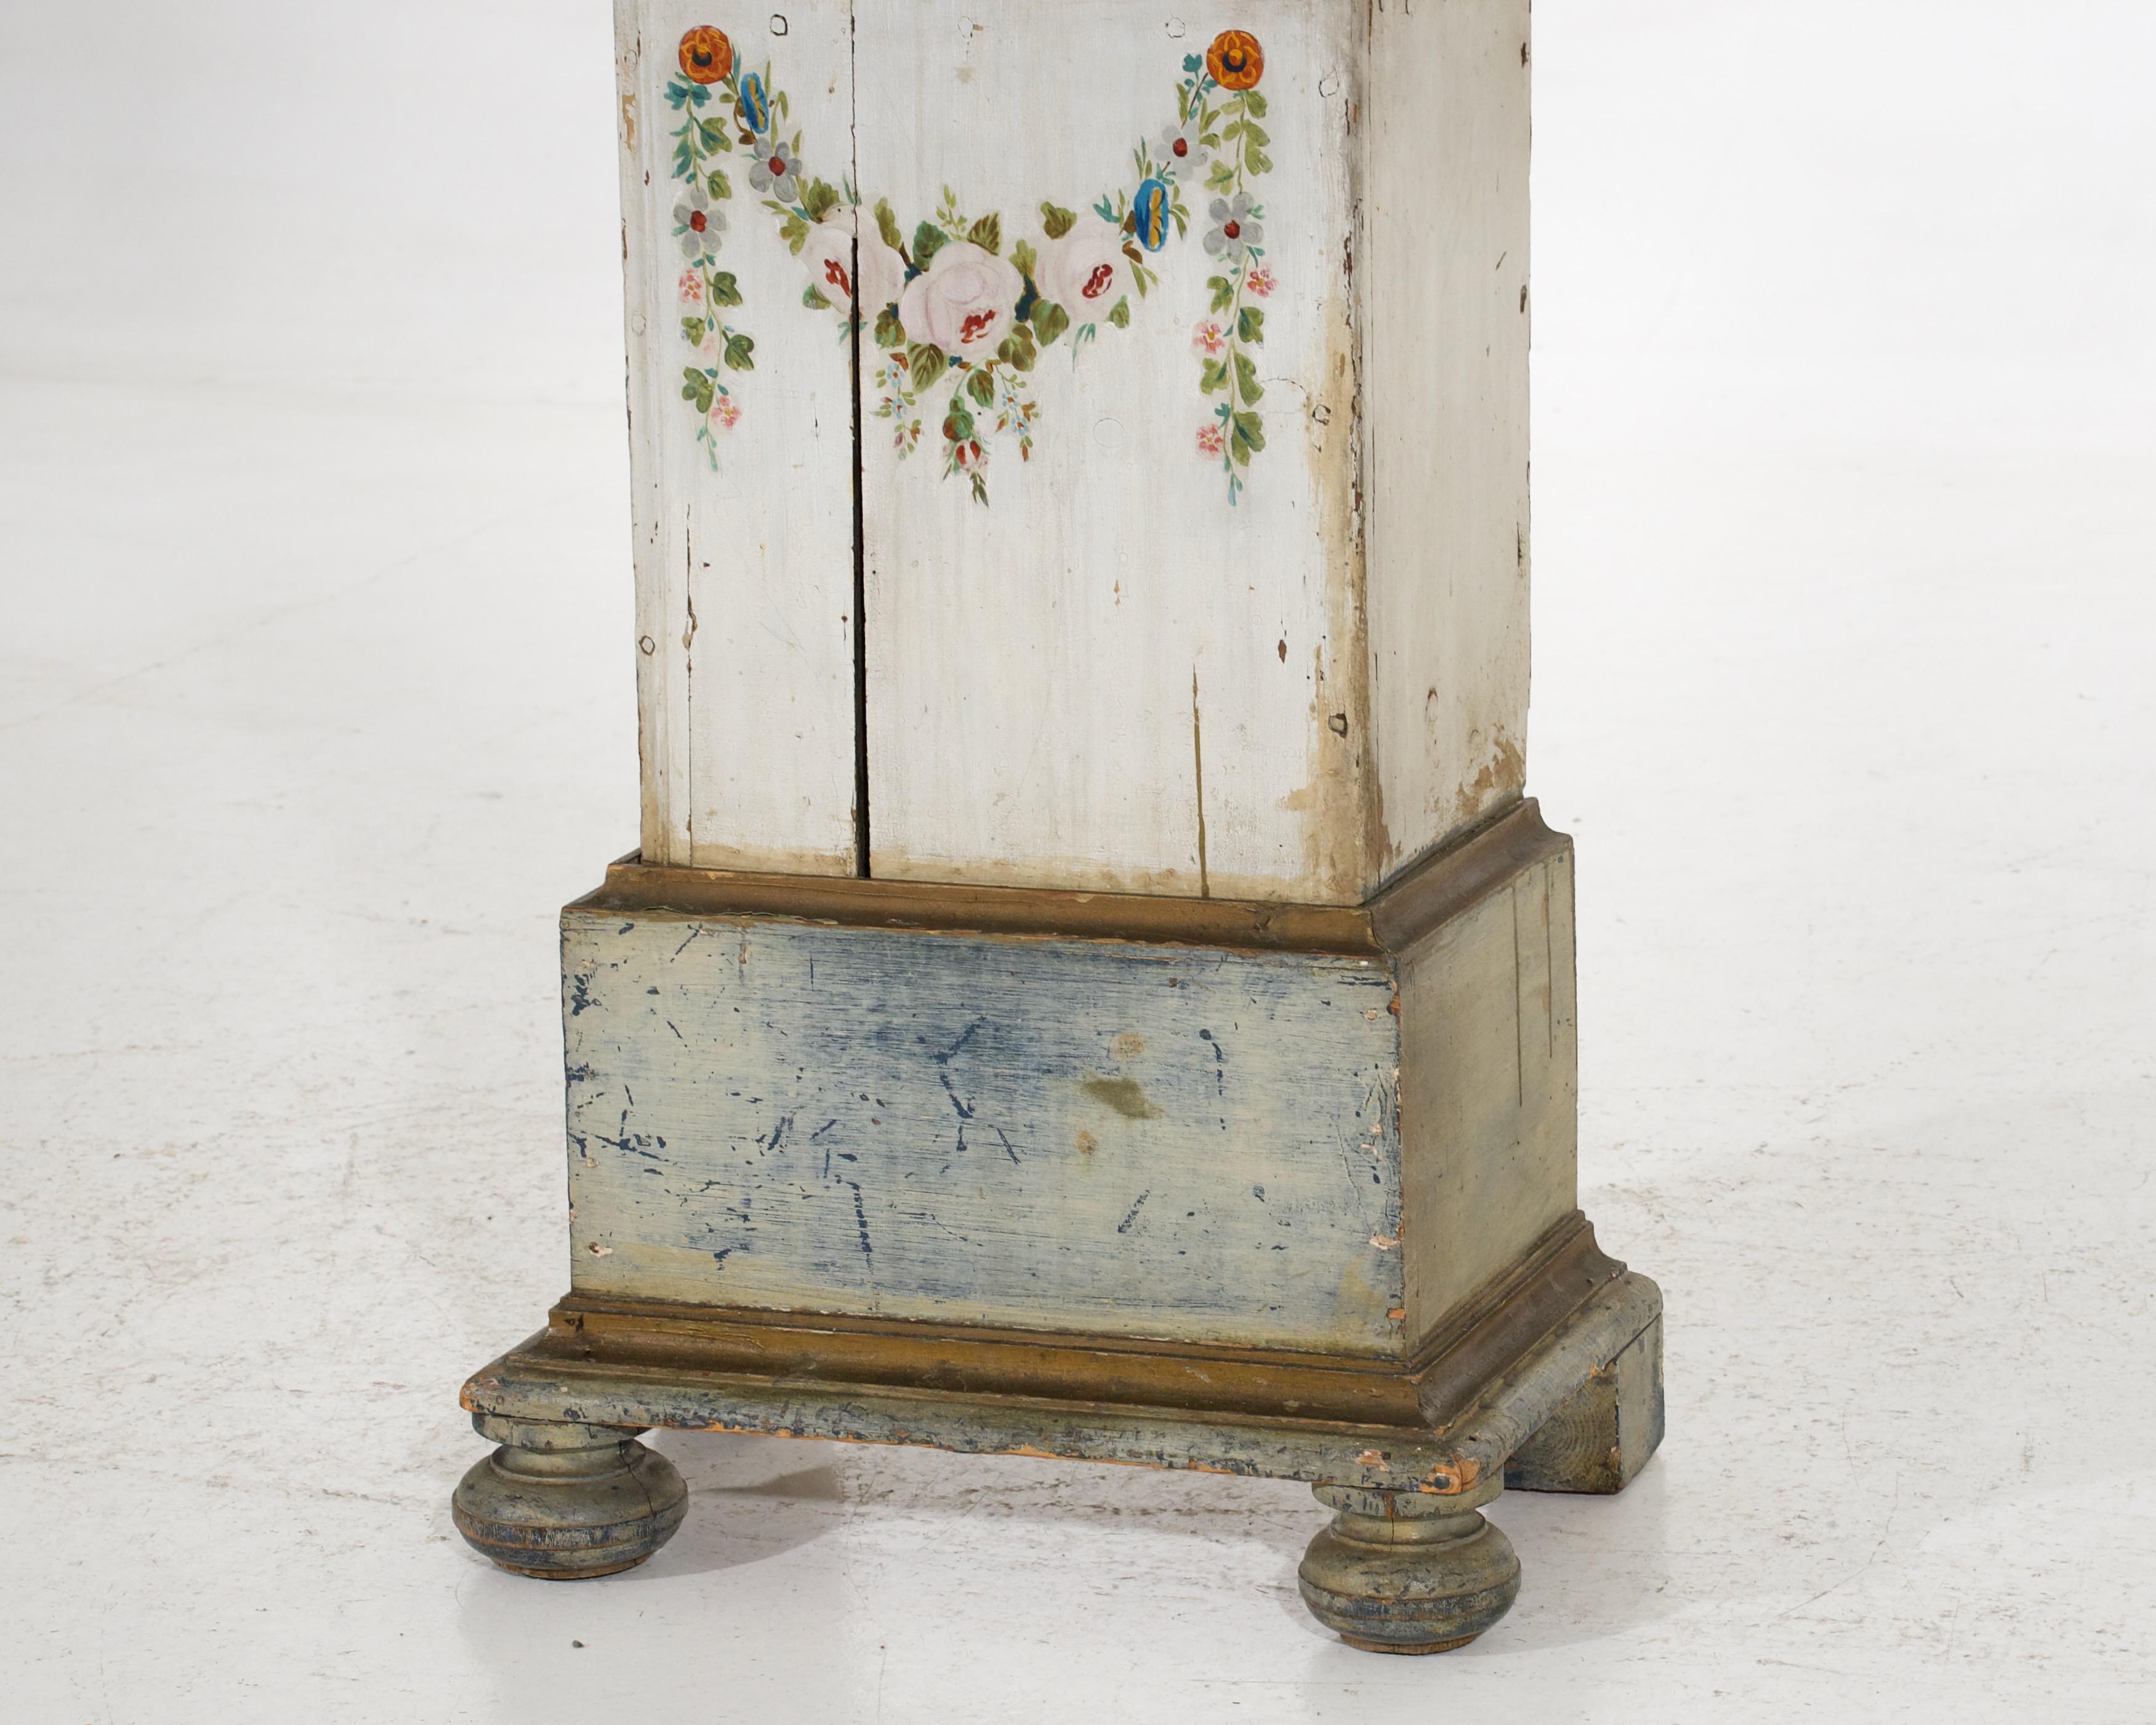 This authentic Swedish grandfather clock, from circa 1790, features its original paint and beautiful floral ornamentation.